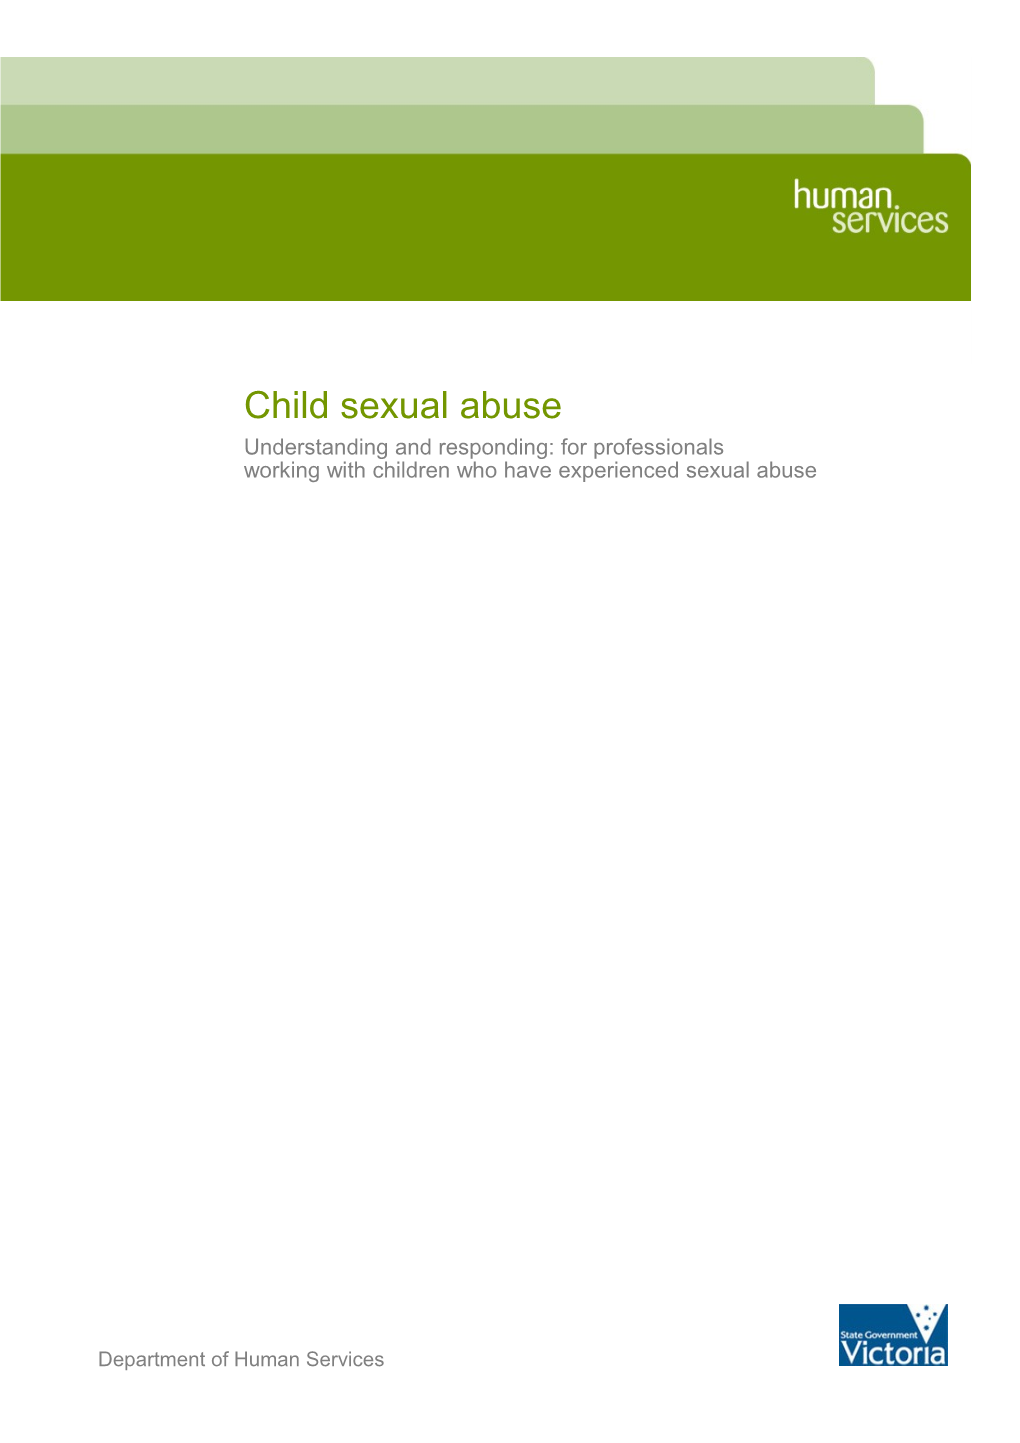 Child Sexual Abuse - Understanding and Responding